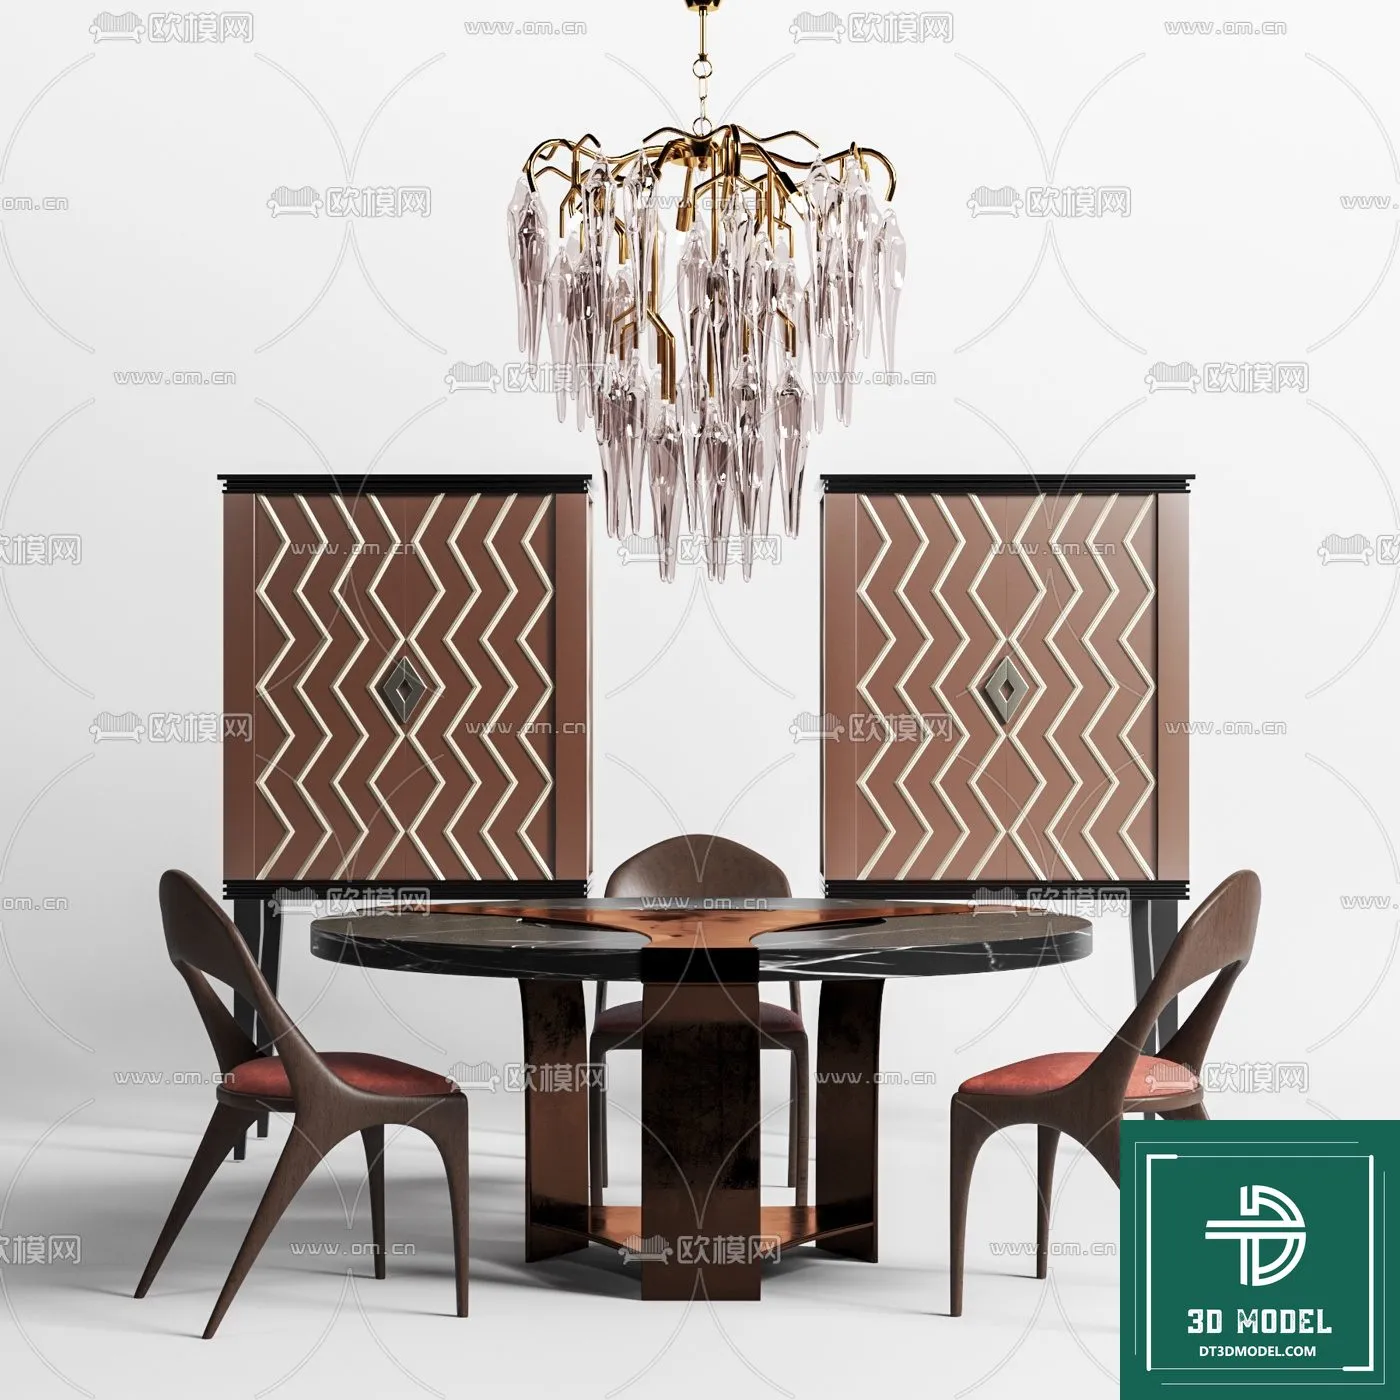 LUXURY – 3D Models – DINING TABLE SETS – 004